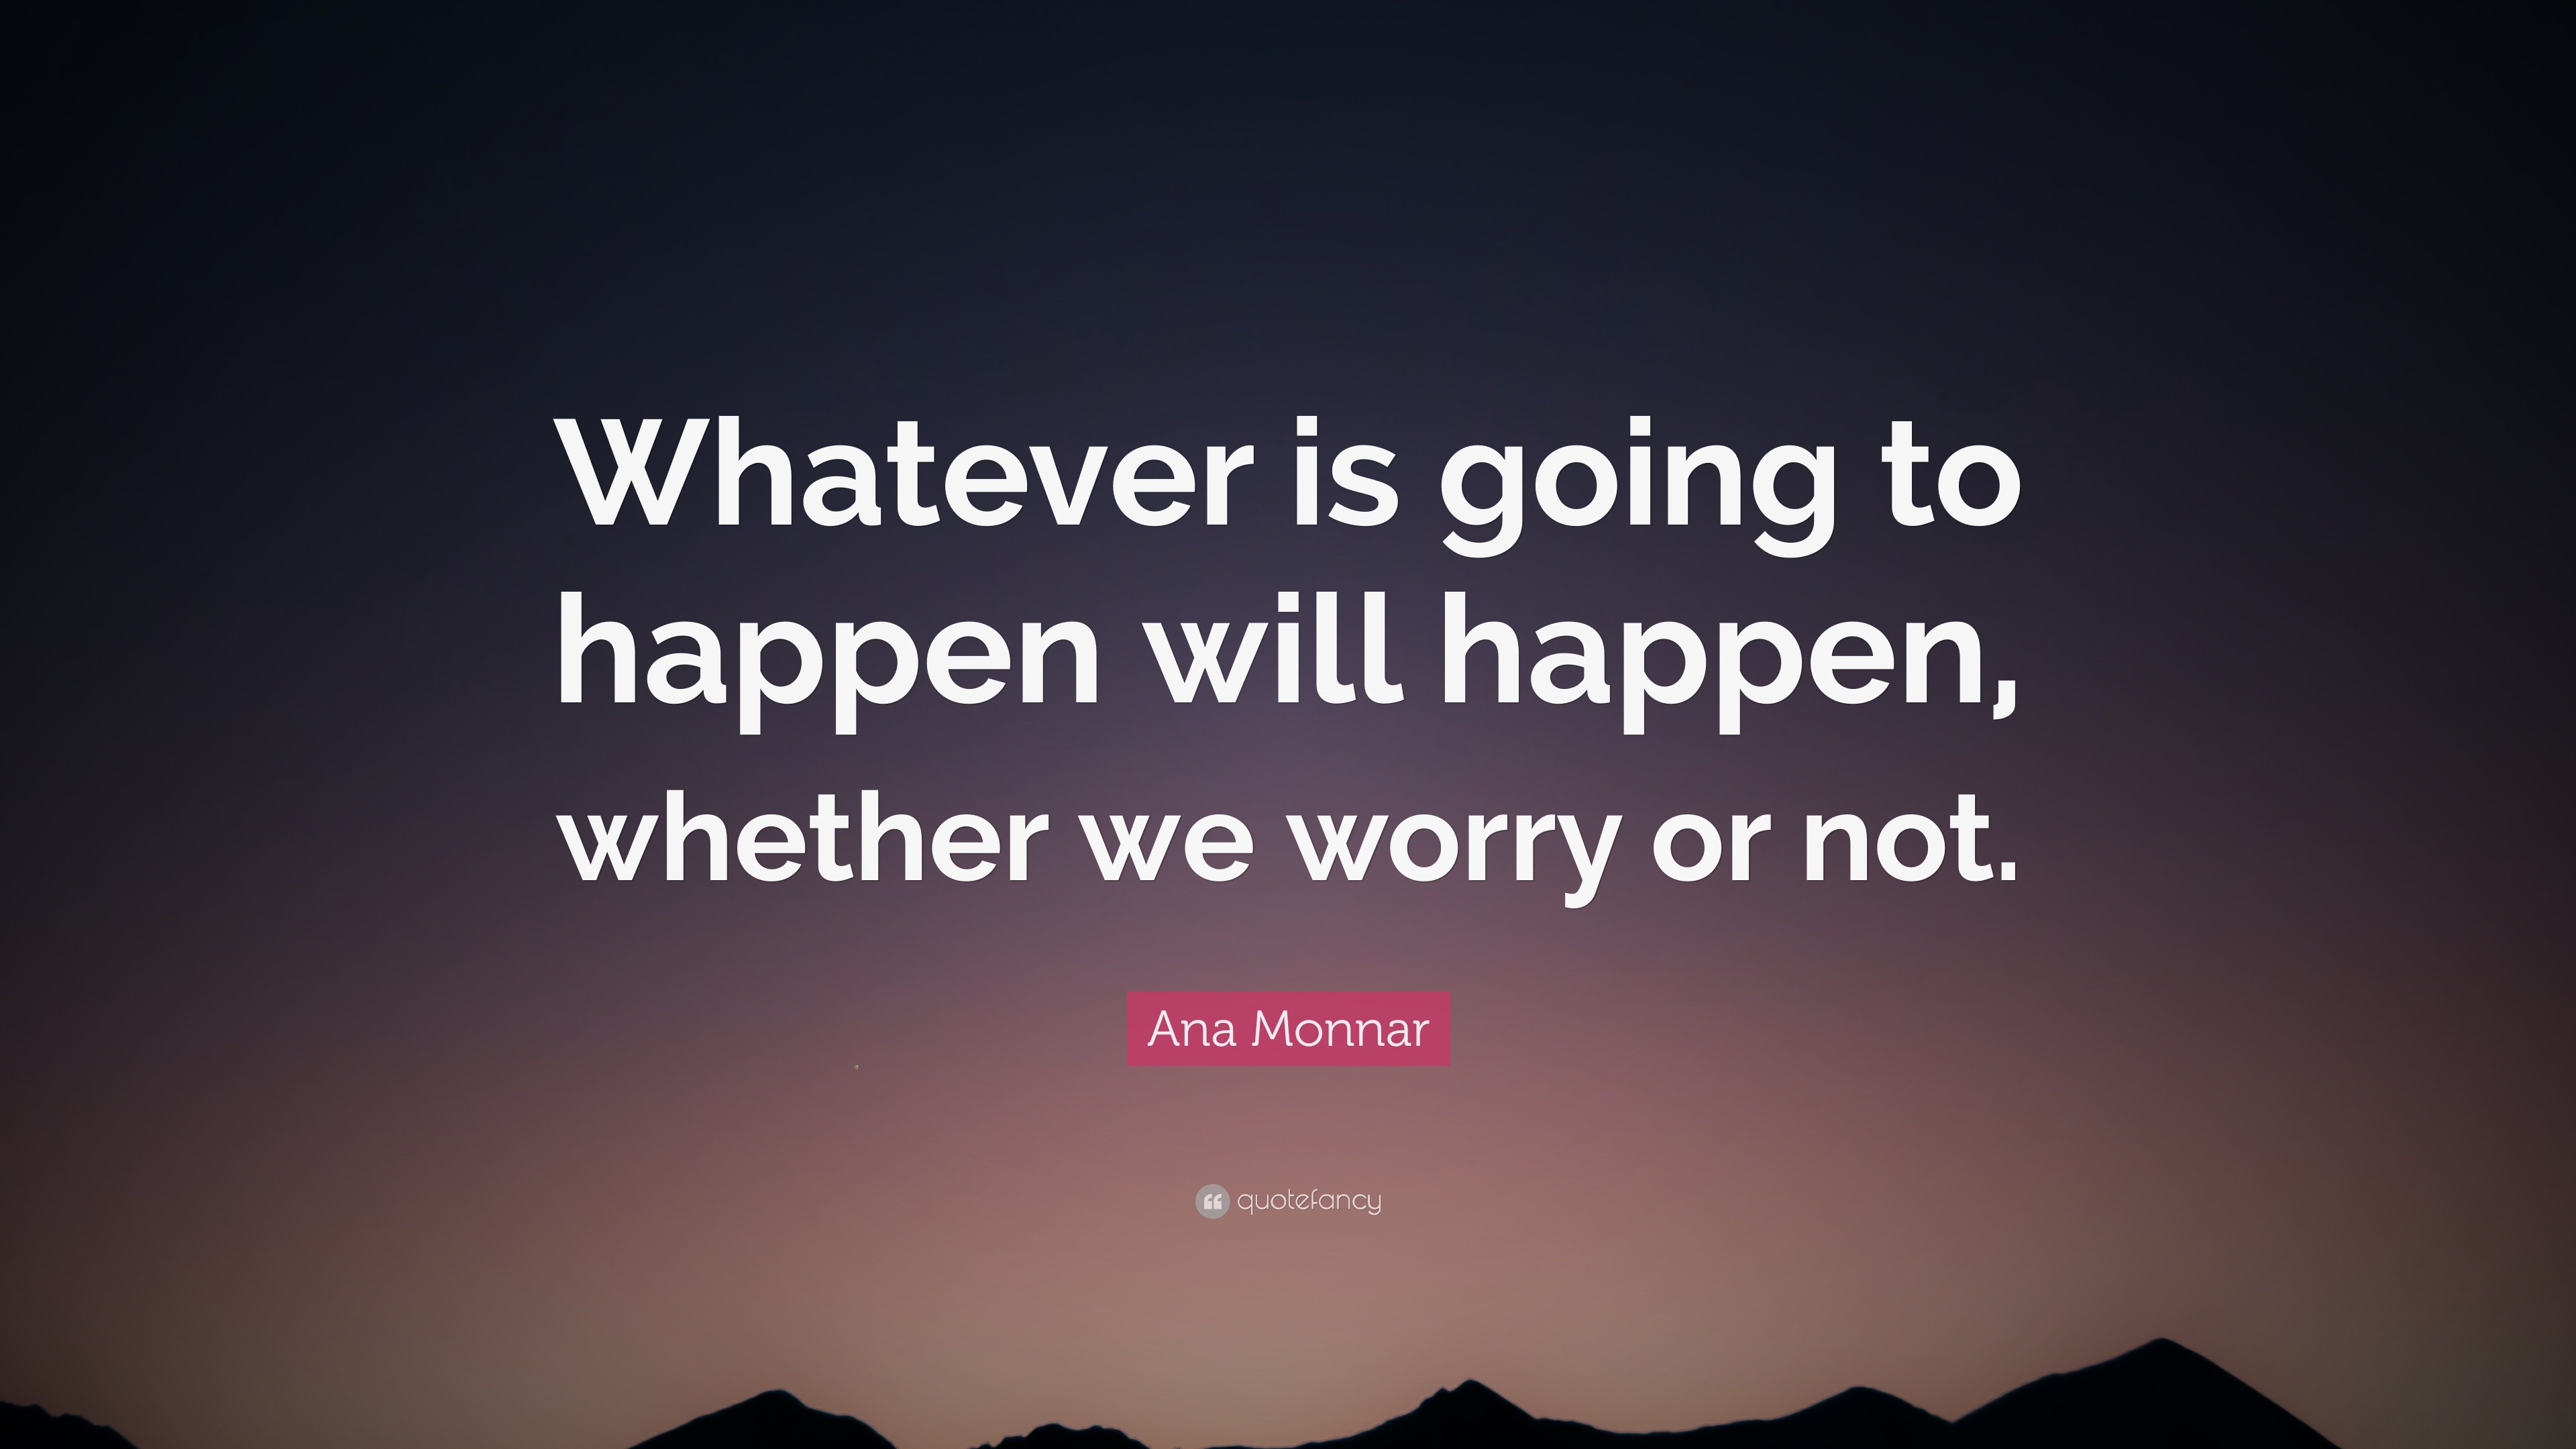 Ana Monnar Quote: “Whatever is going to happen will happen, whether we ...